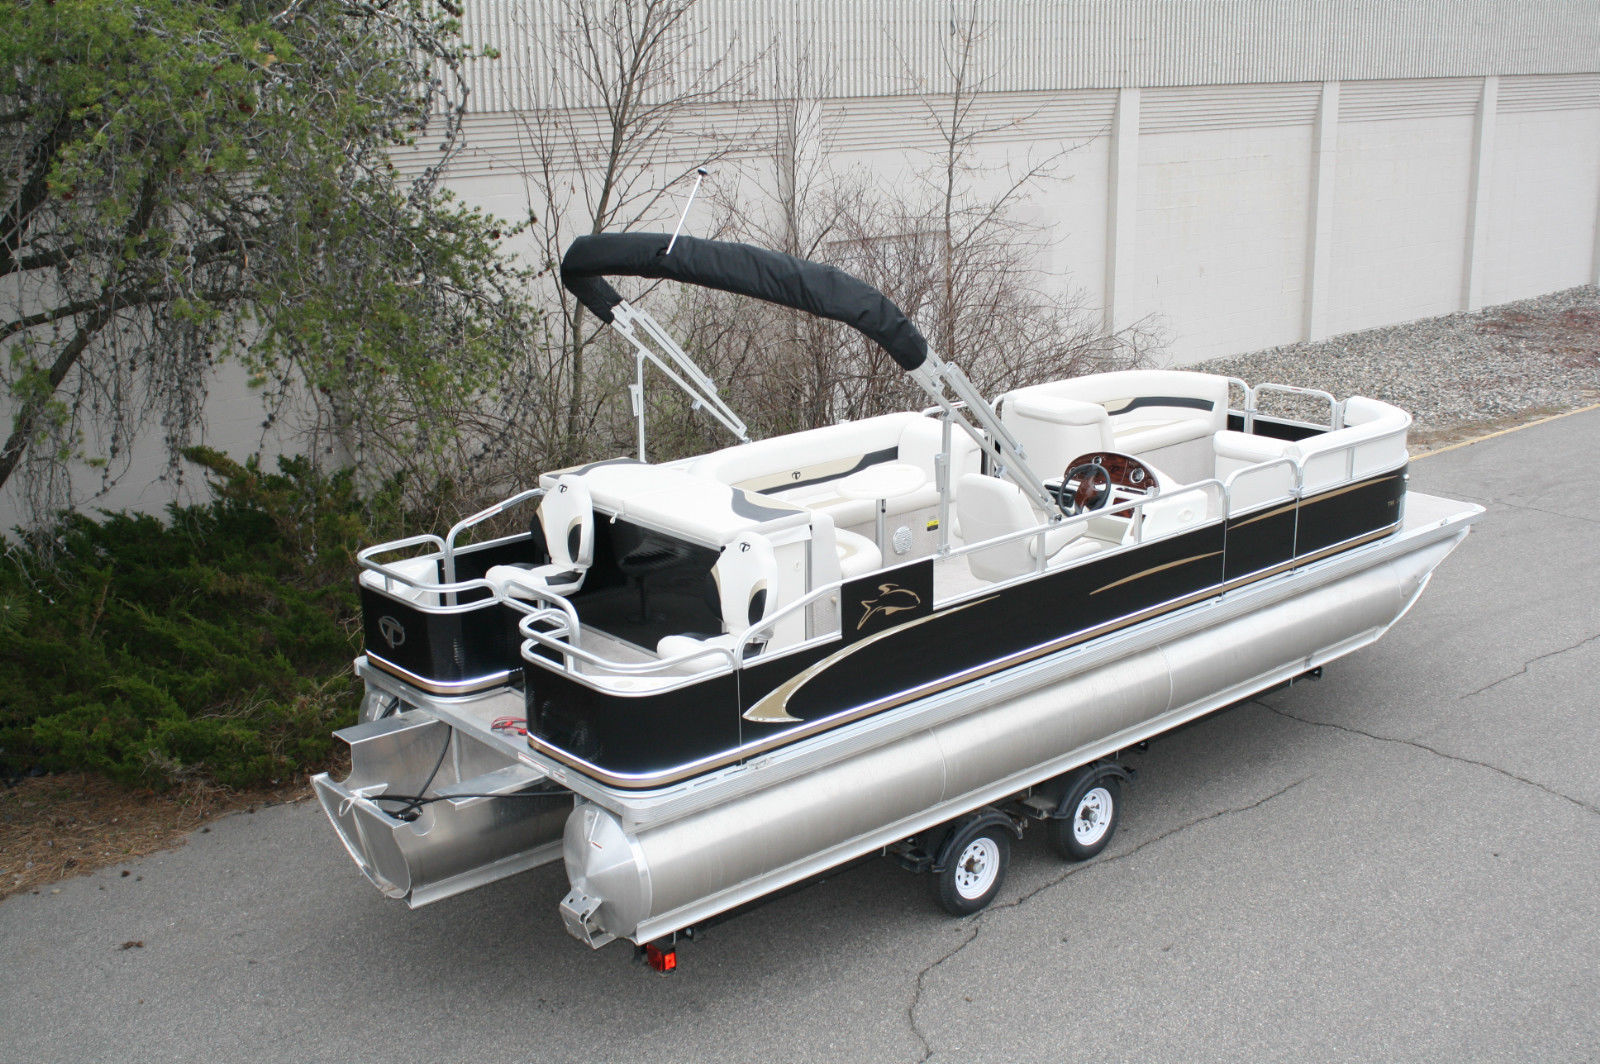 special---new 24 ft high tritoon pontoon boat 2014 for